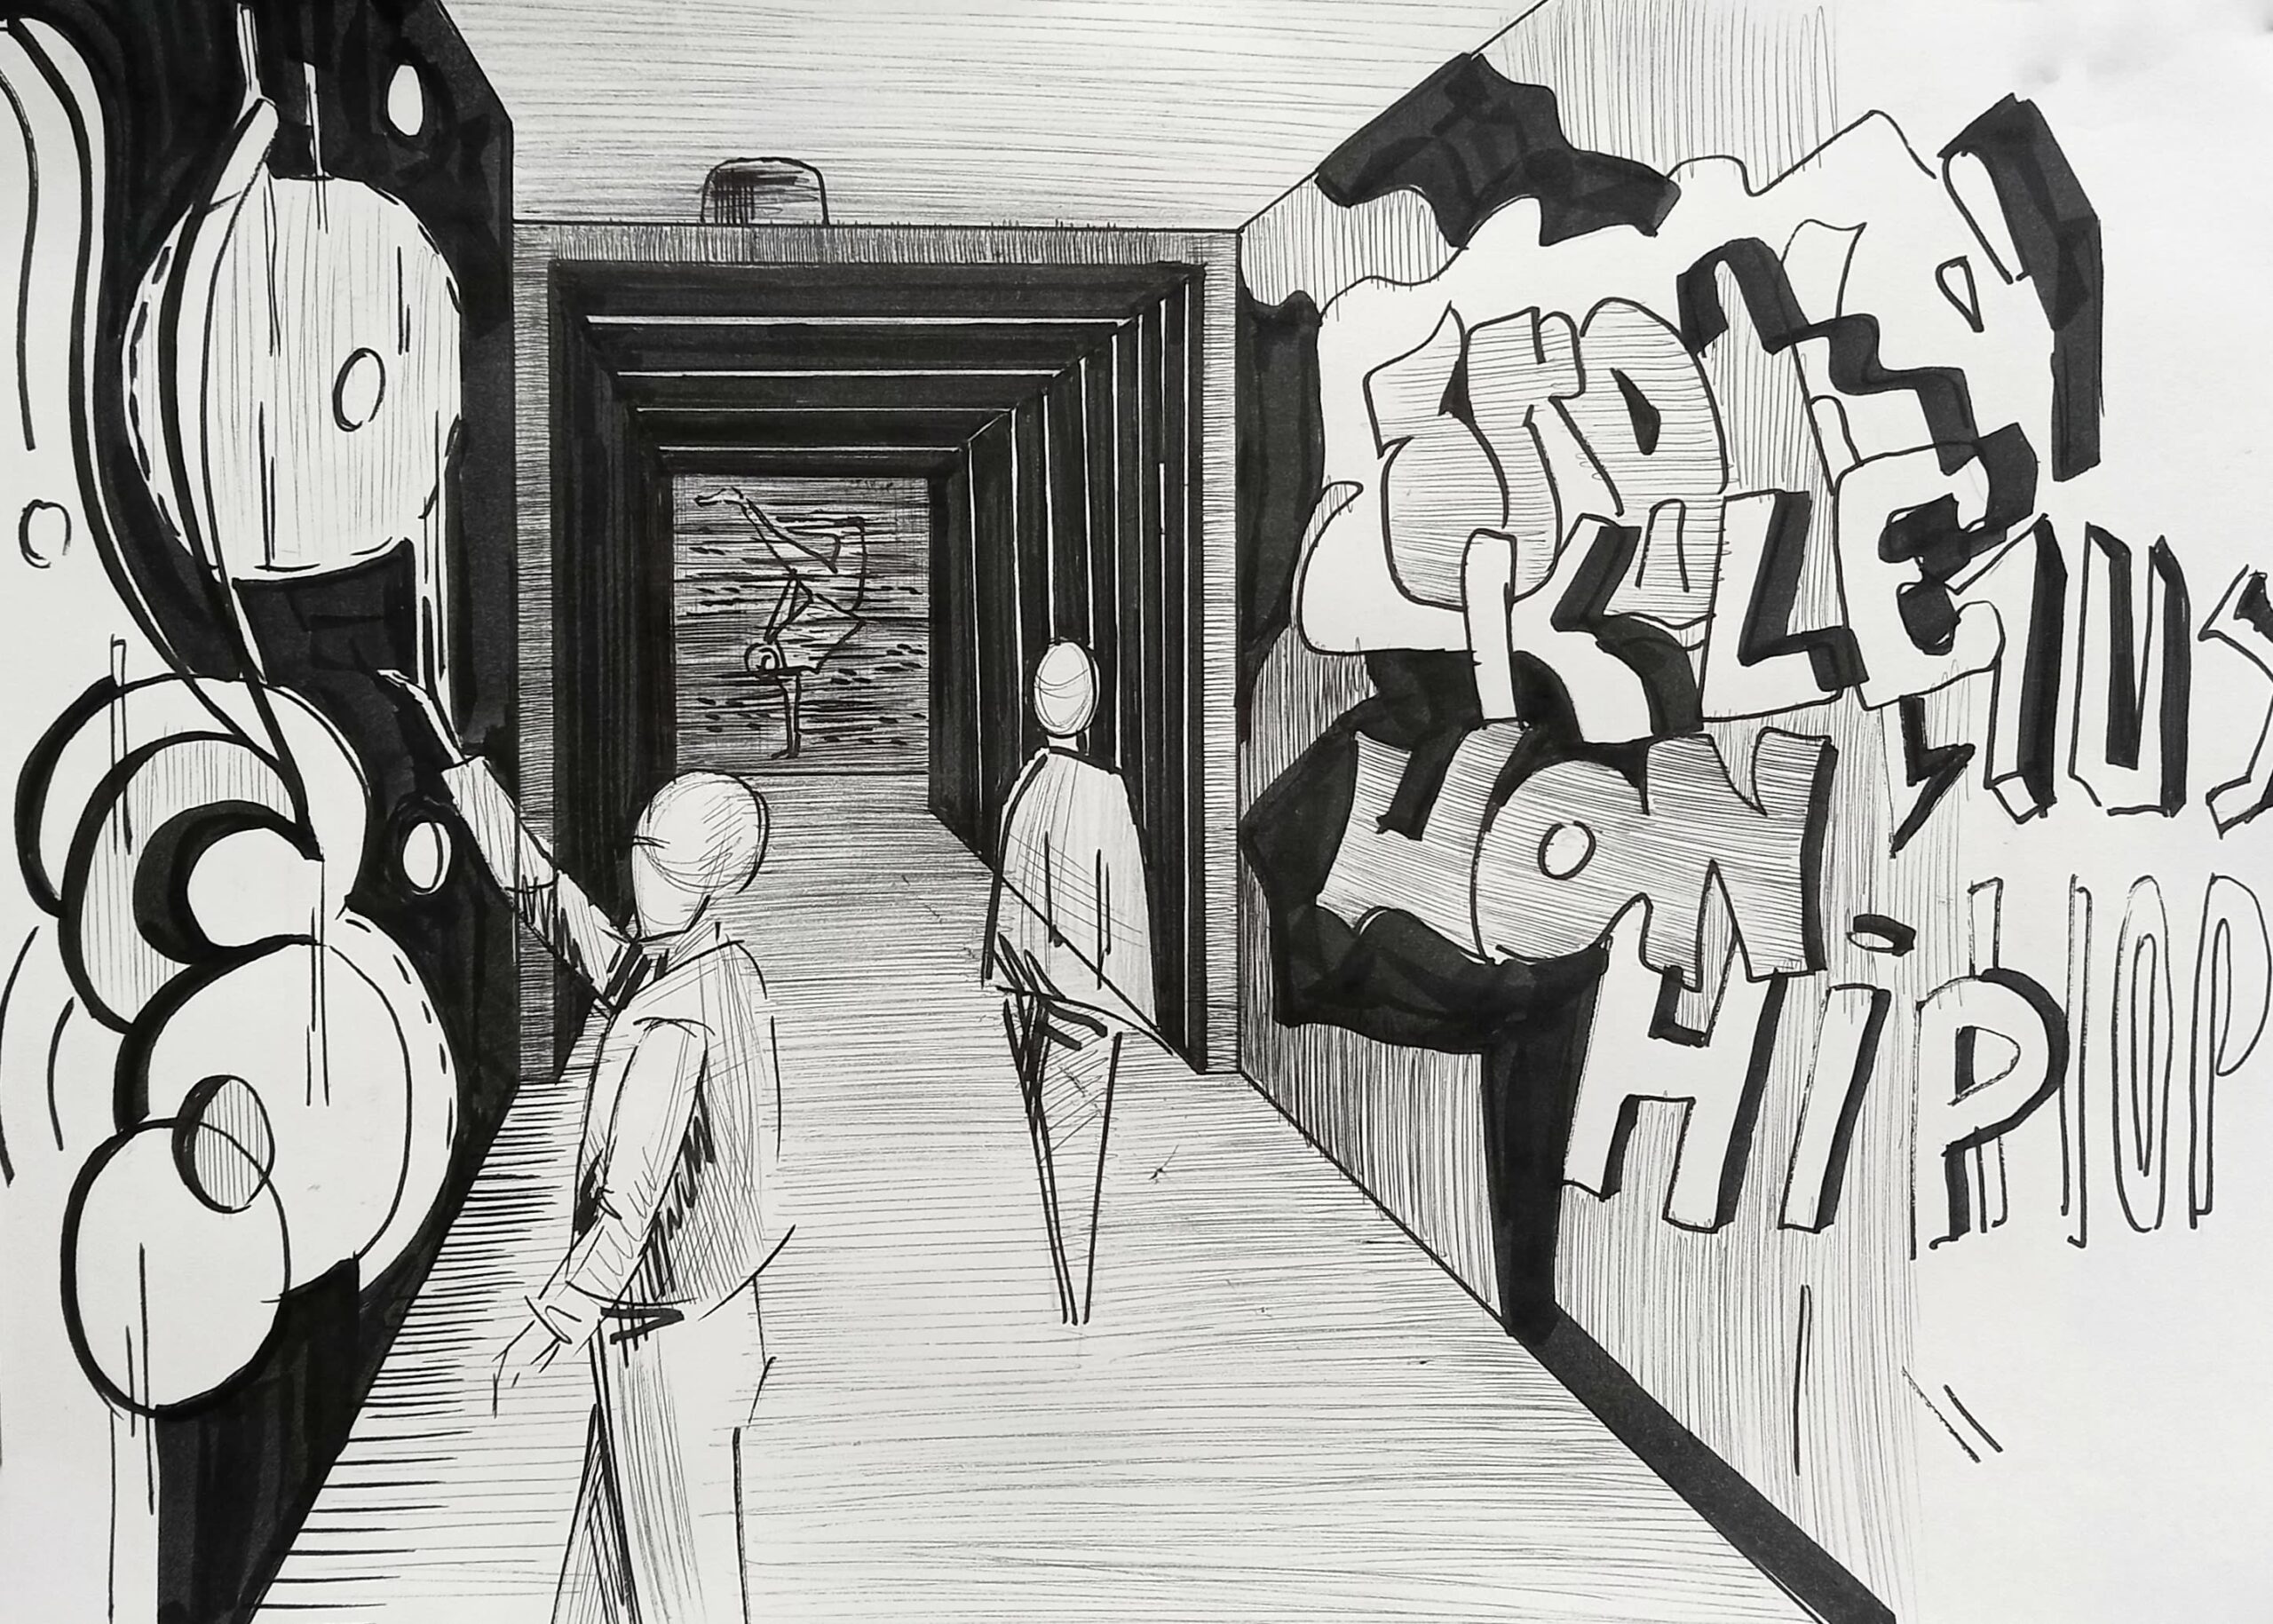 The Universal Hip Hop Museum’s Immersive Graffiti Experience: An Artistic Intersection of Nostalgia and Modernity